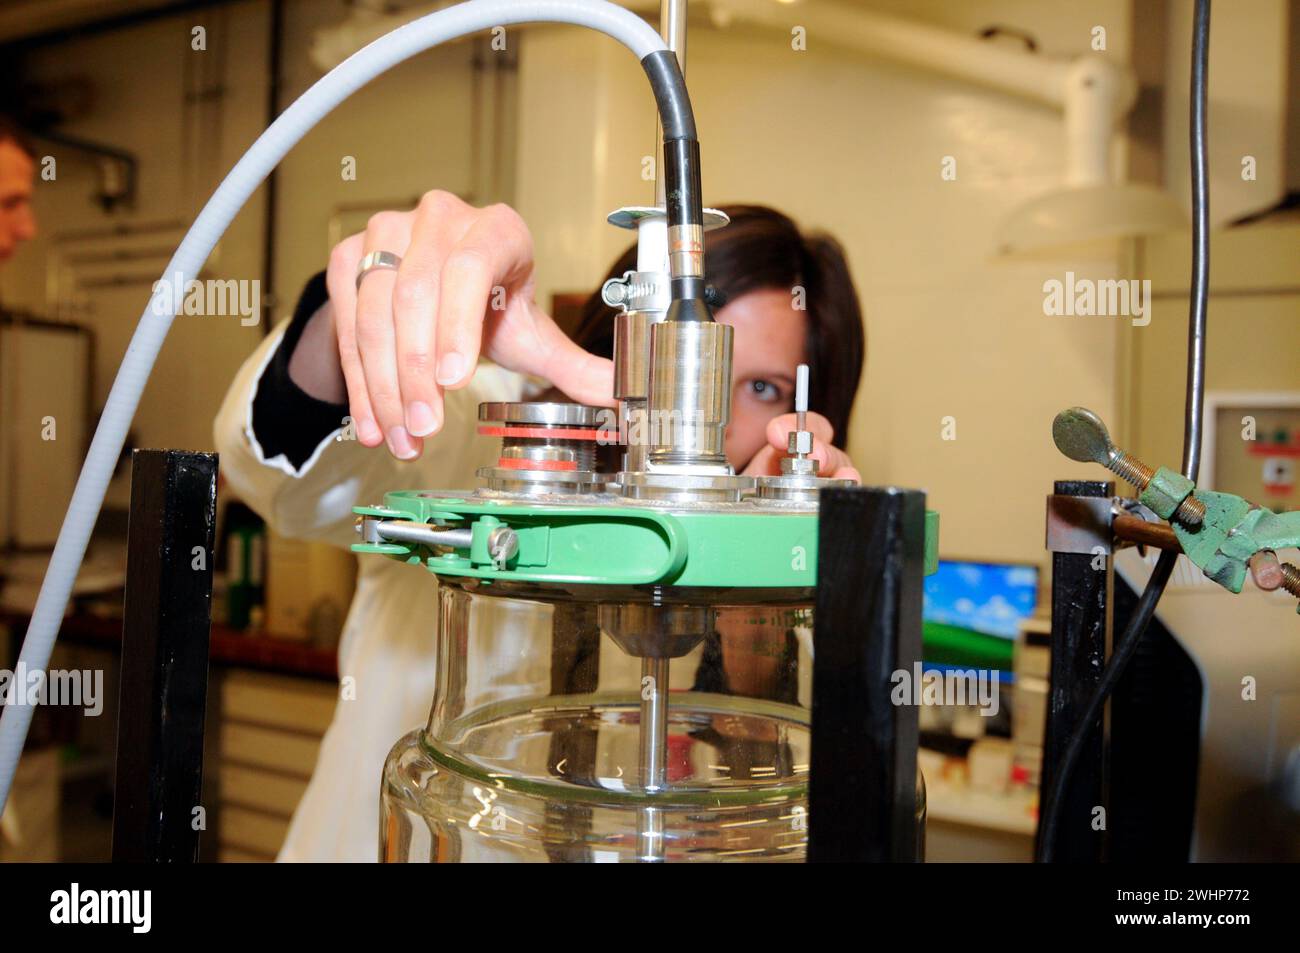 Working in a chemical laboratory Stock Photo